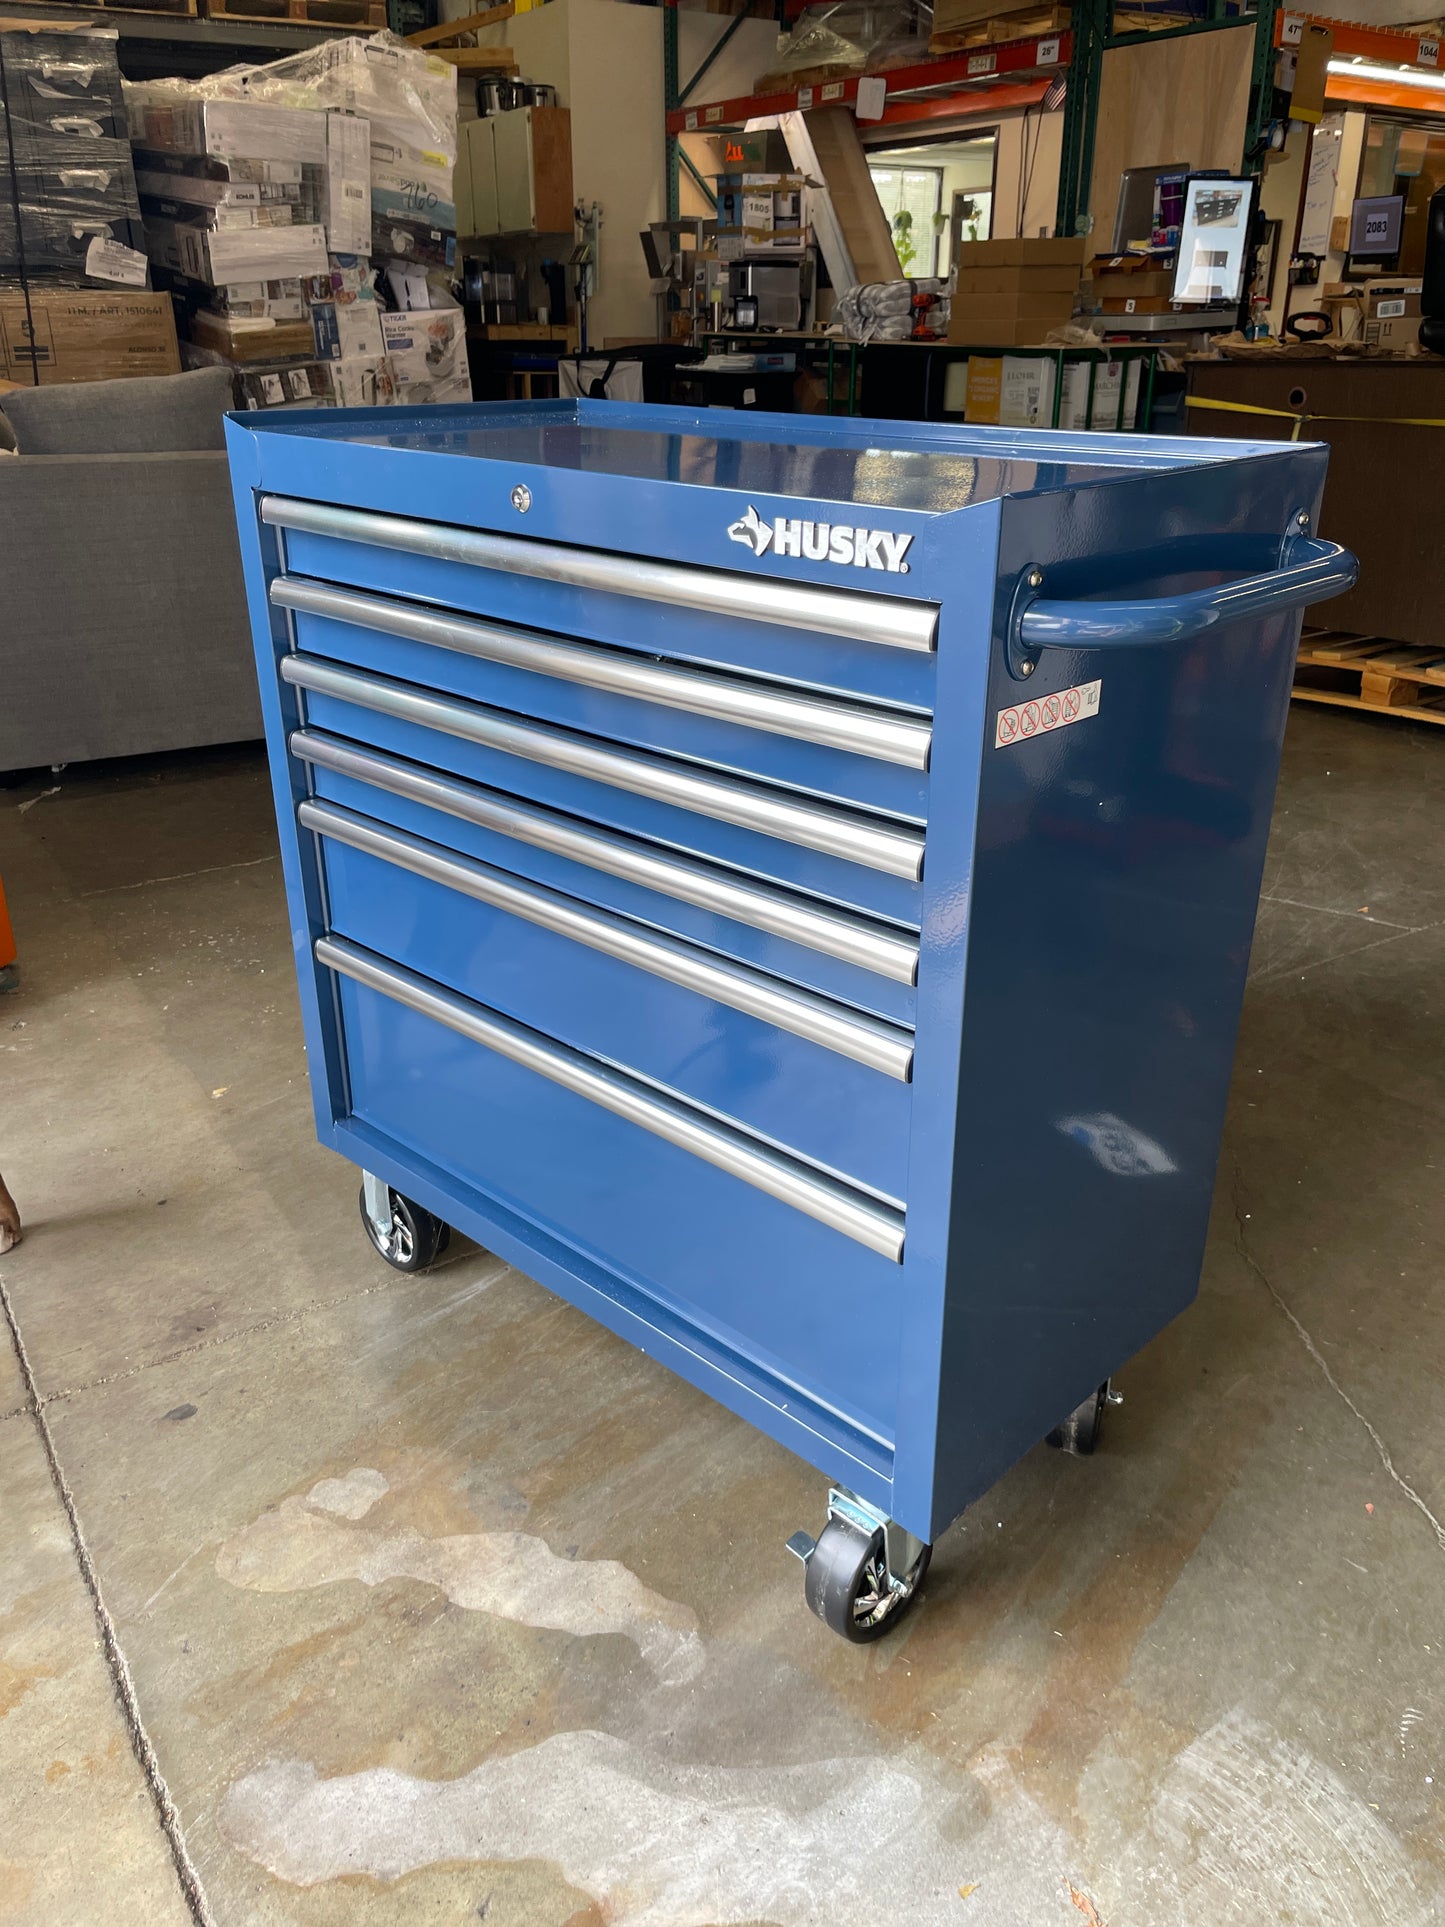 NEW IN BOX - Husky 36" 6-Drawer Blue Tool Chest - Retail $499